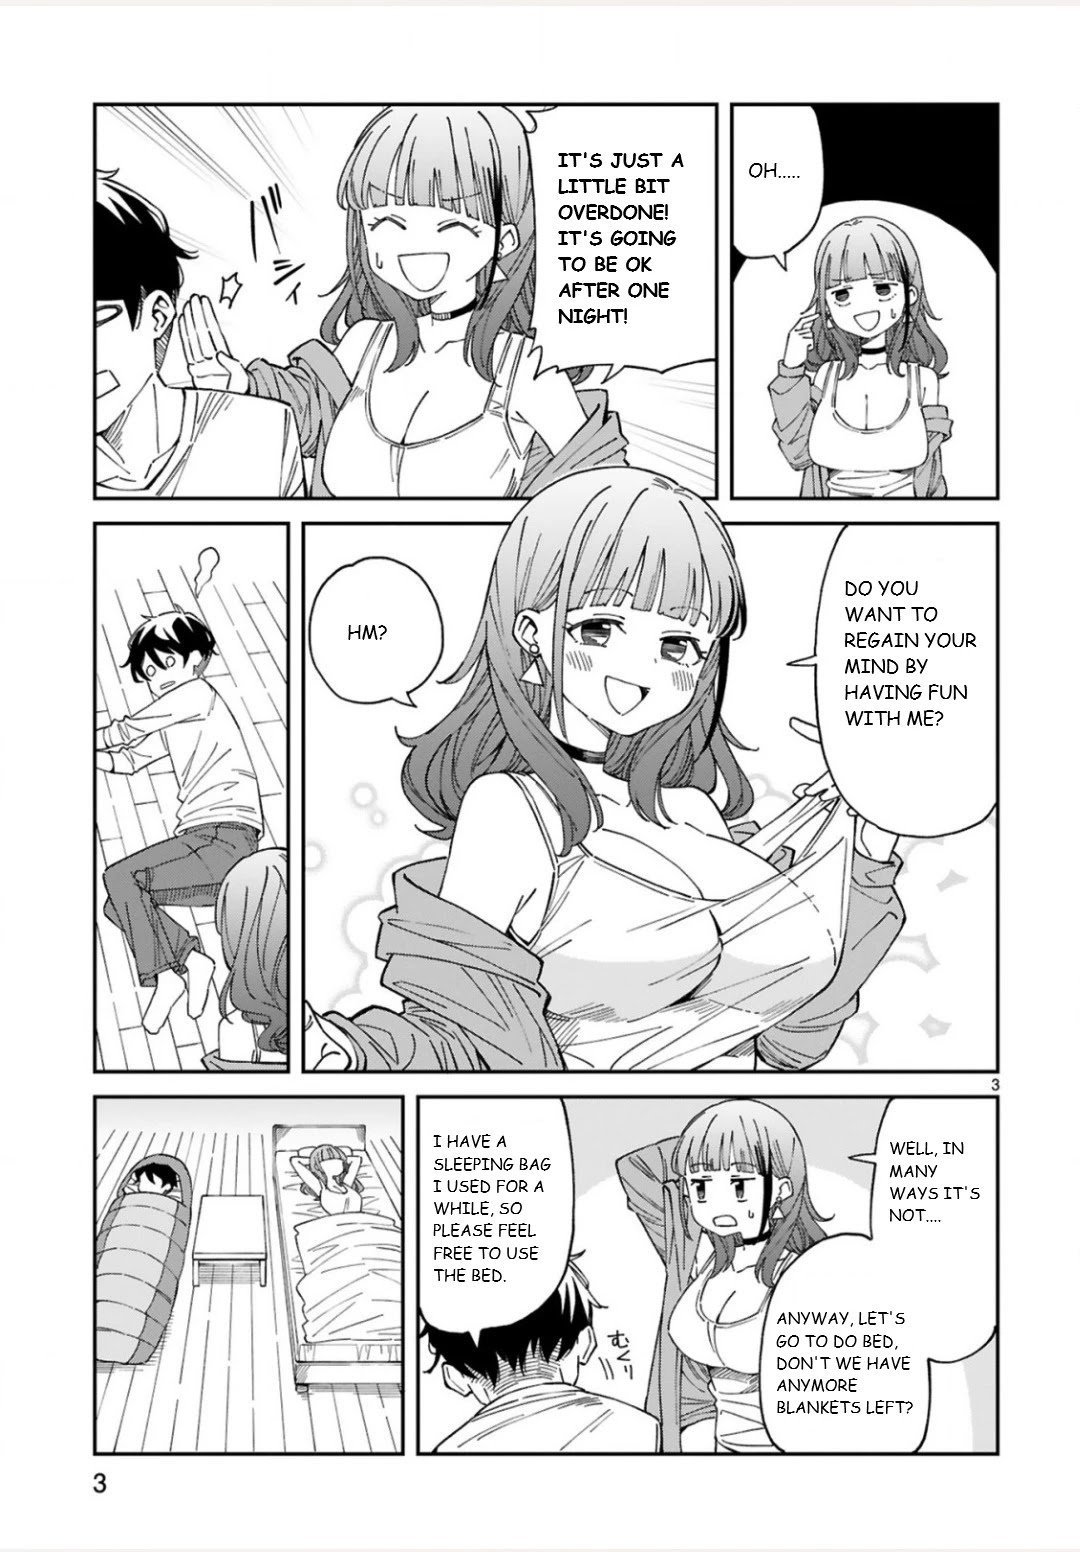 Read A Mother In Her S Like Me Is Alright Manga English New Chapters Online Free Mangaclash